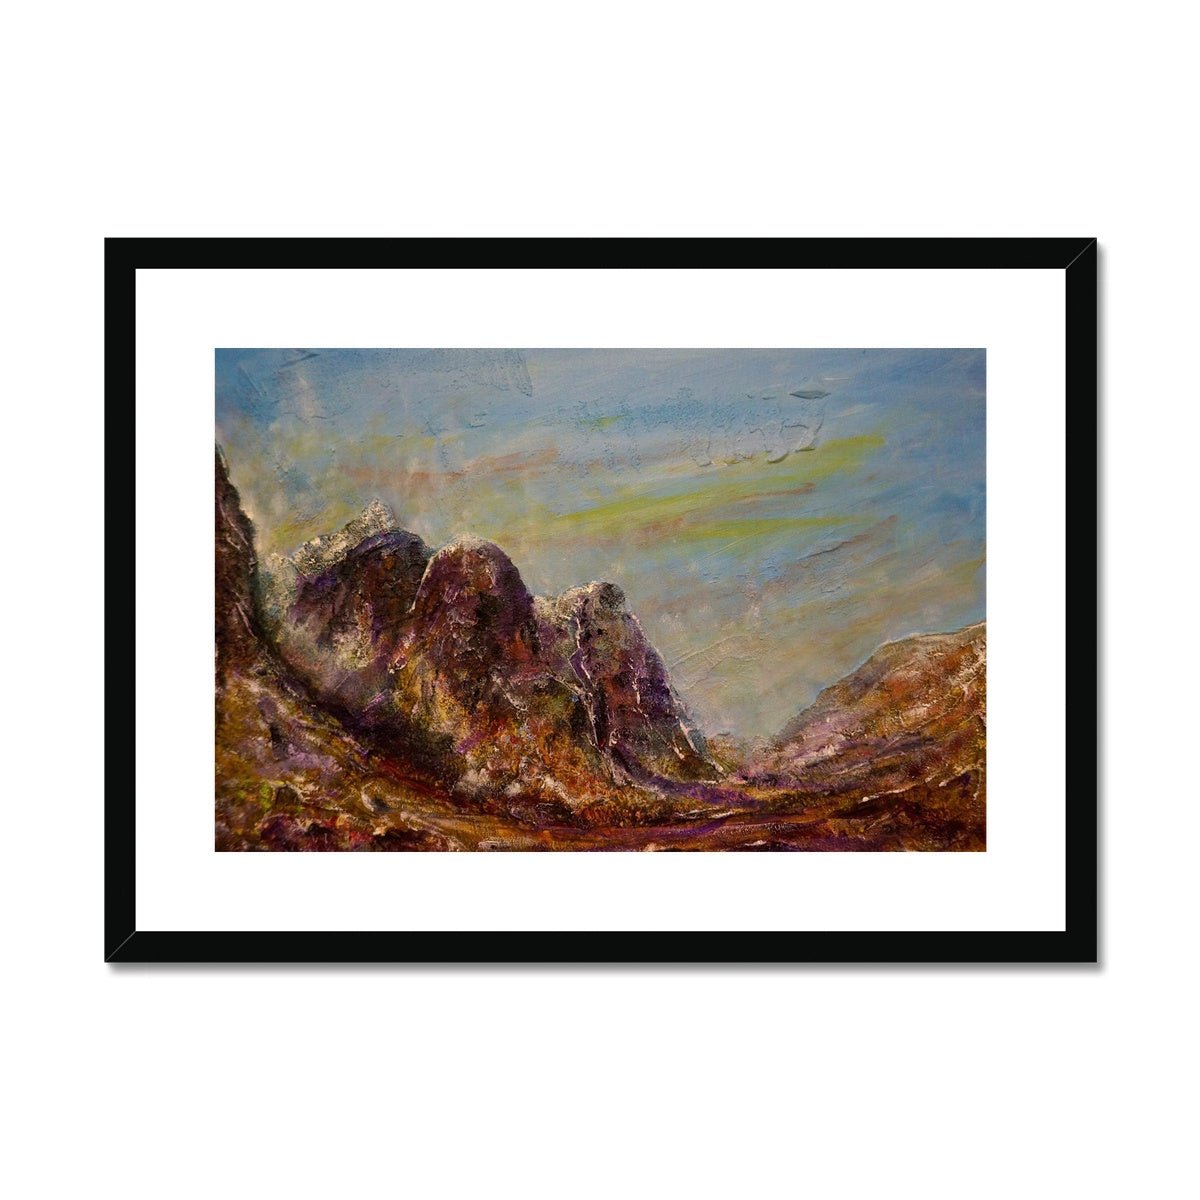 Three Sisters Glencoe Painting | Framed & Mounted Prints From Scotland-Framed & Mounted Prints-Glencoe Art Gallery-A2 Landscape-Black Frame-Paintings, Prints, Homeware, Art Gifts From Scotland By Scottish Artist Kevin Hunter